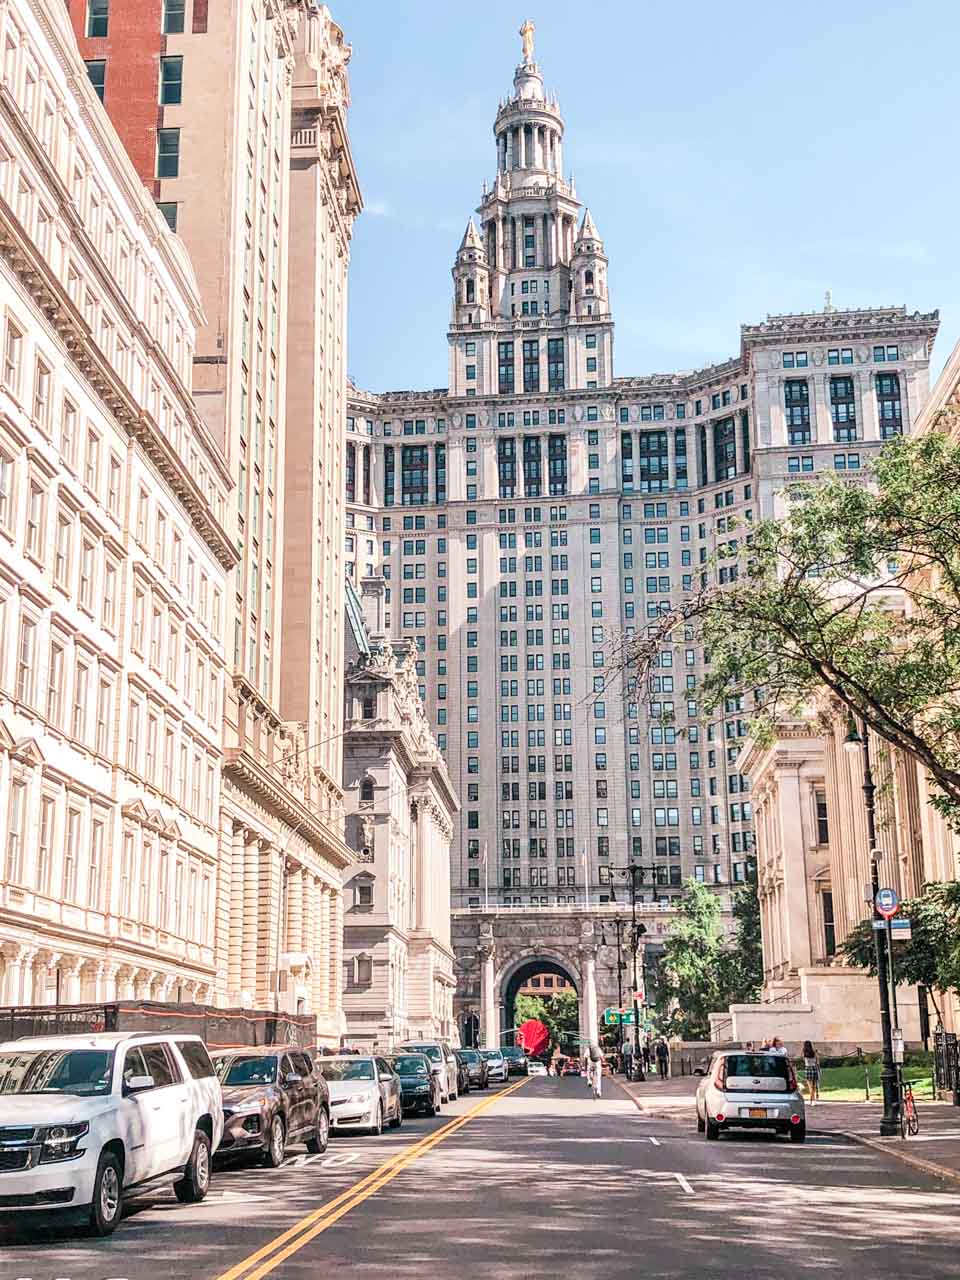 The City Hall building in New York City